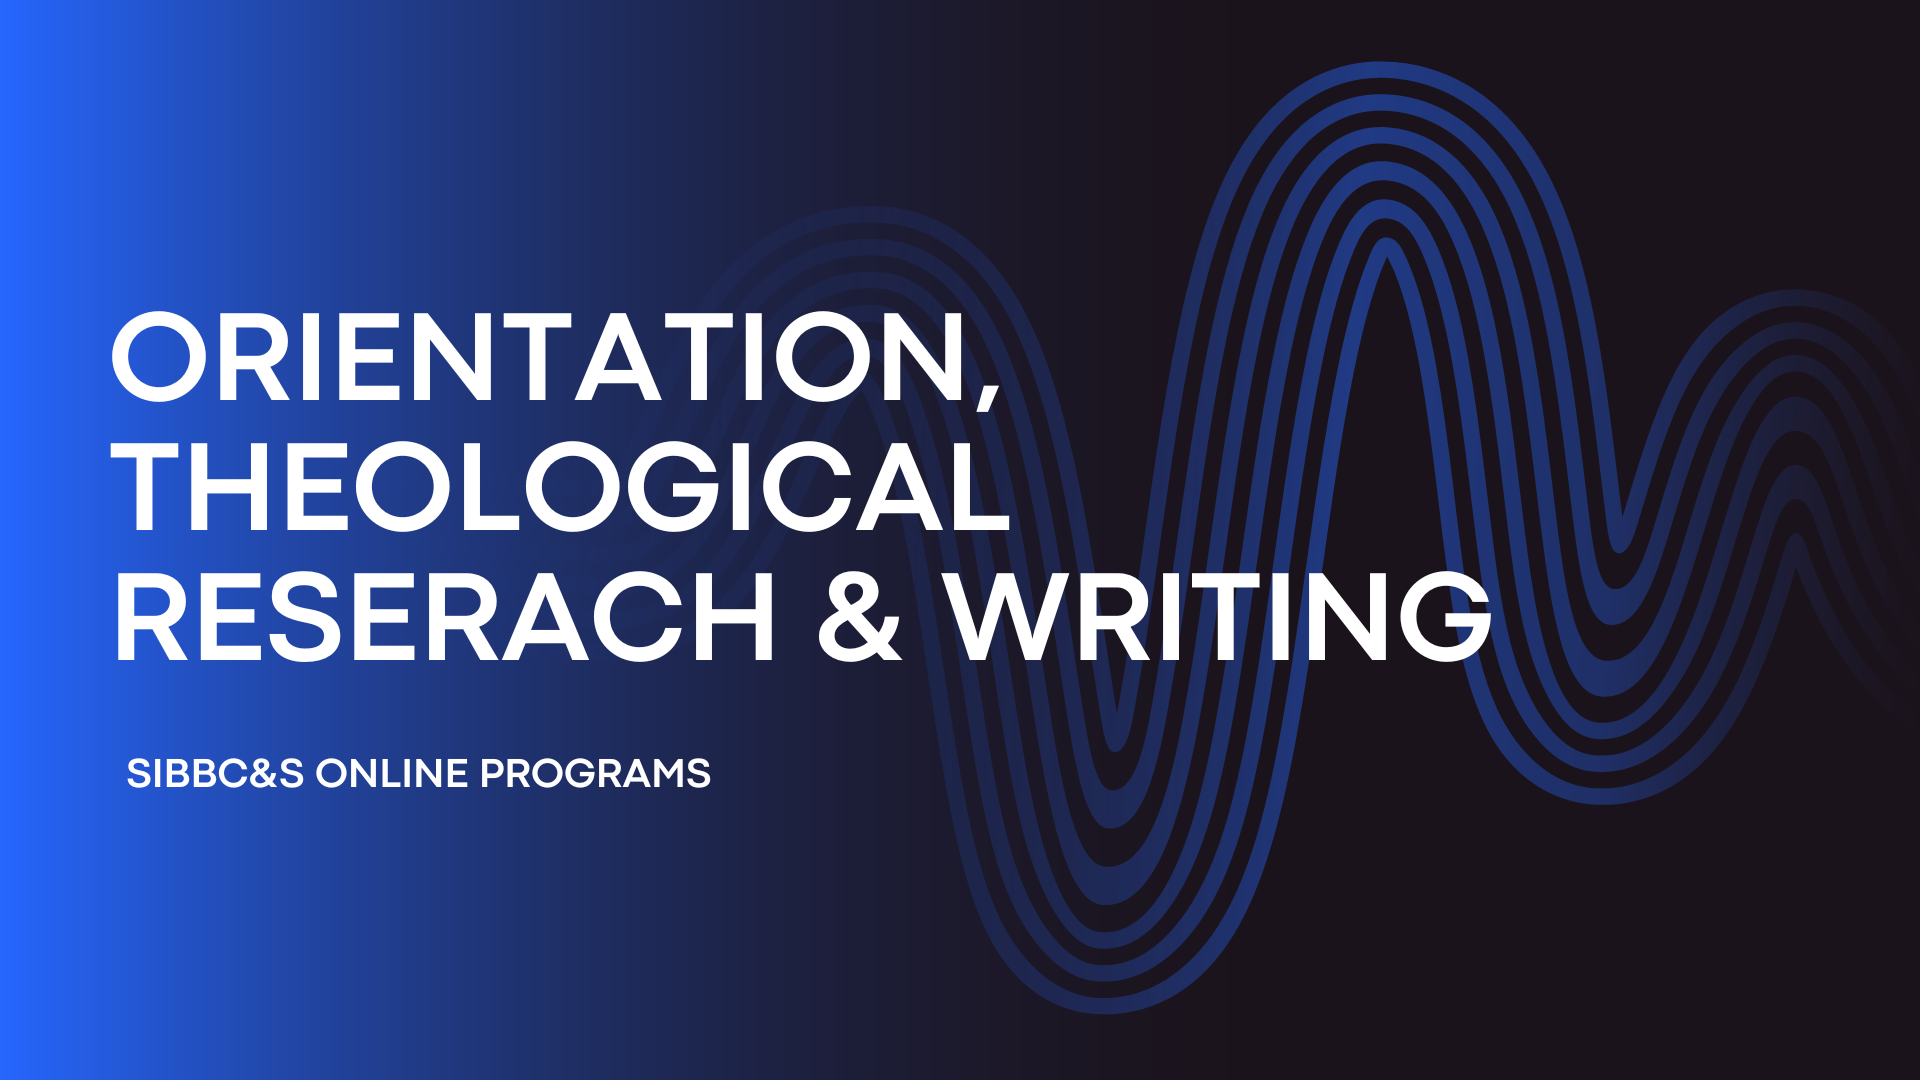 ORIENTATION, THEOLOGICAL RESEARCH AND WRITING 07/23